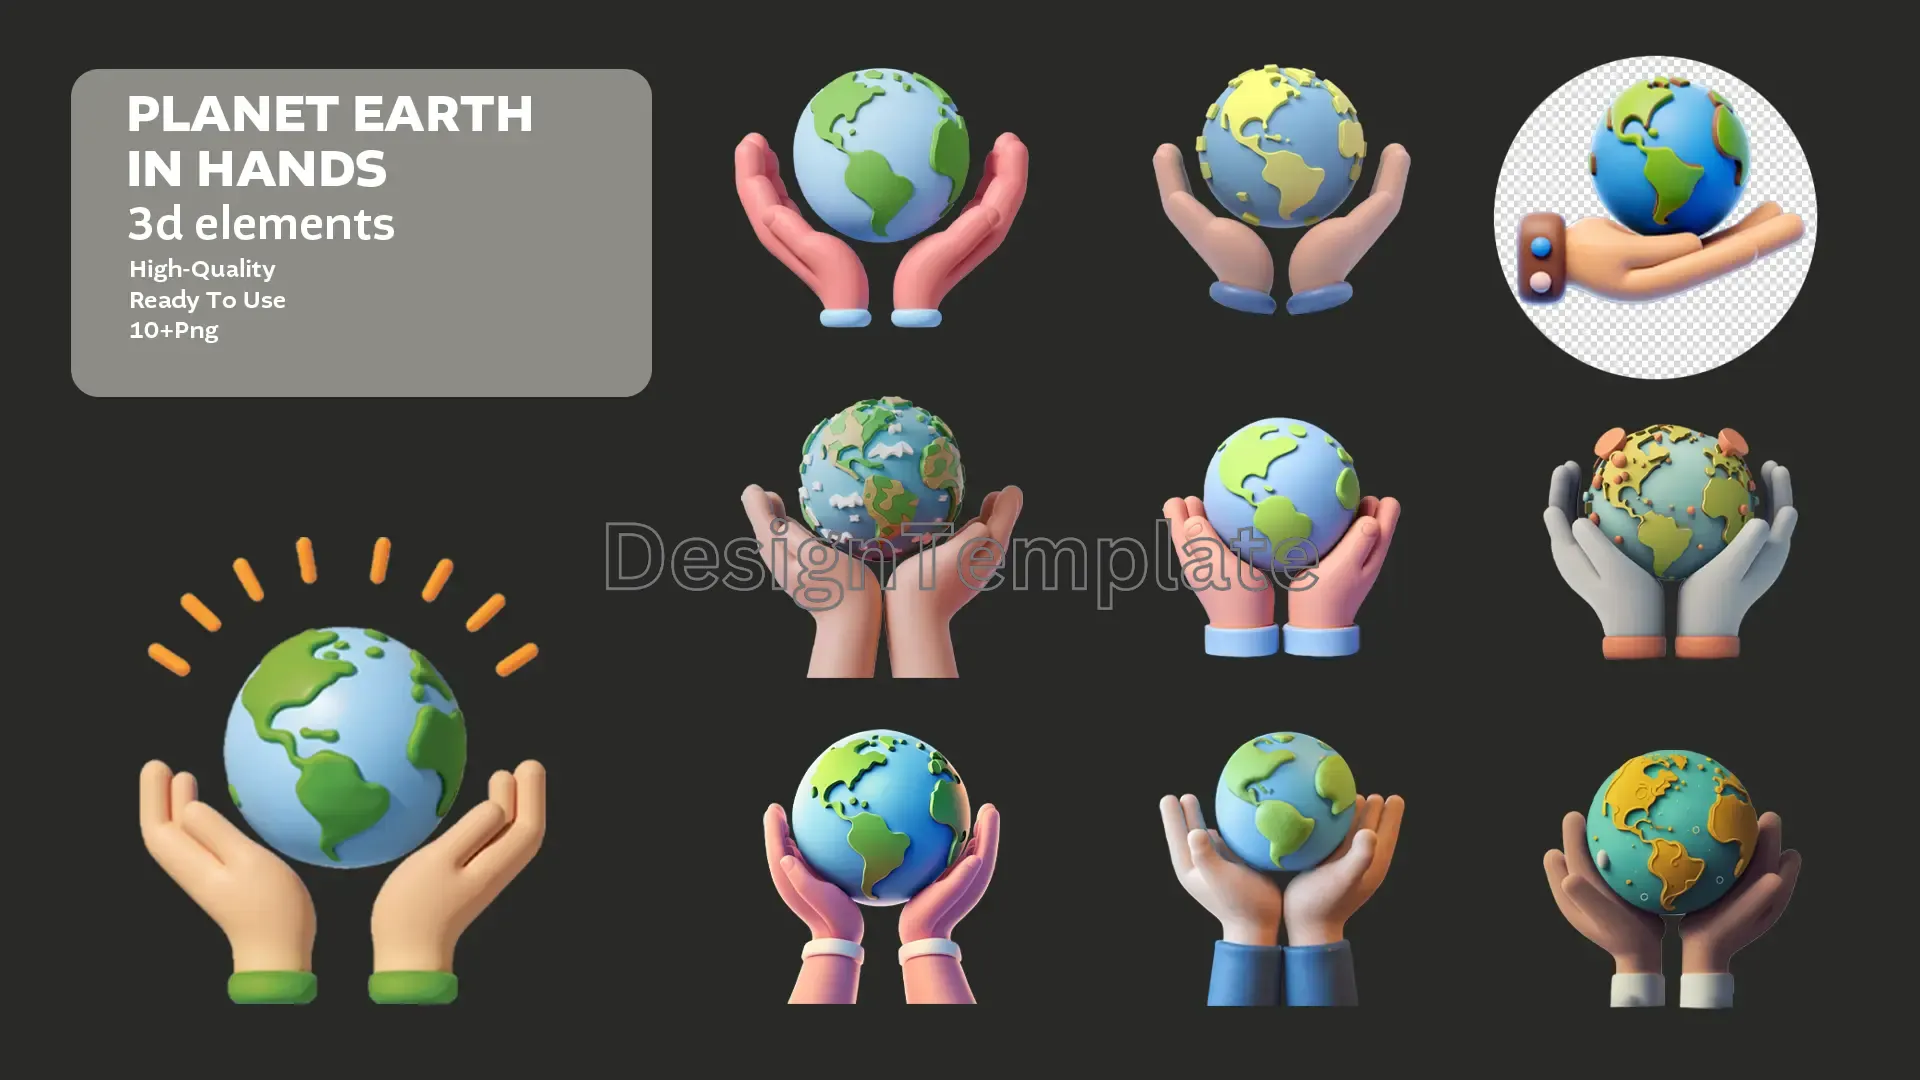 Global Grasp Planet Earth in Hands 3D Elements image